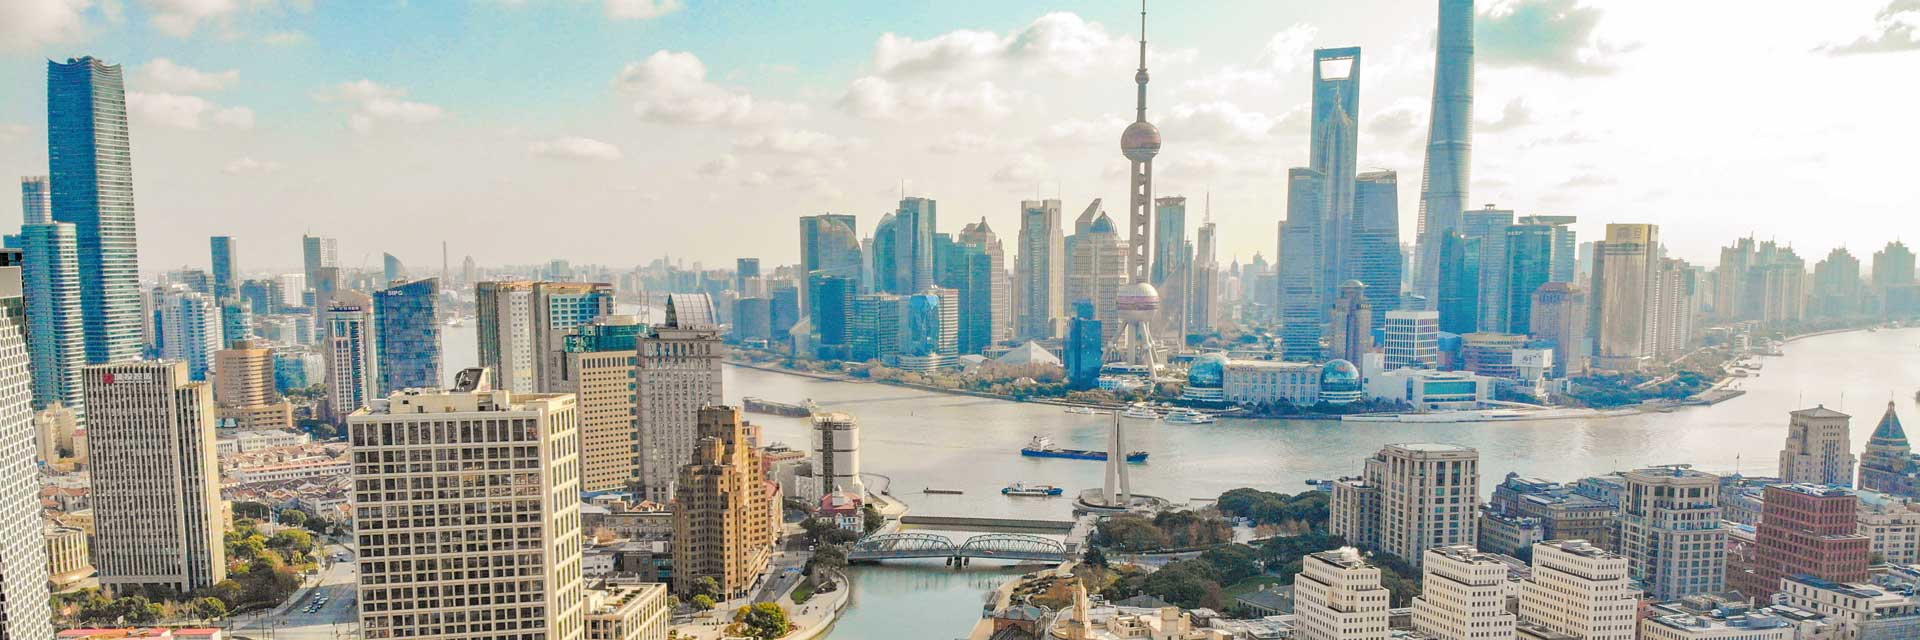 Shanghai optimizes business ecosystem with IP protection